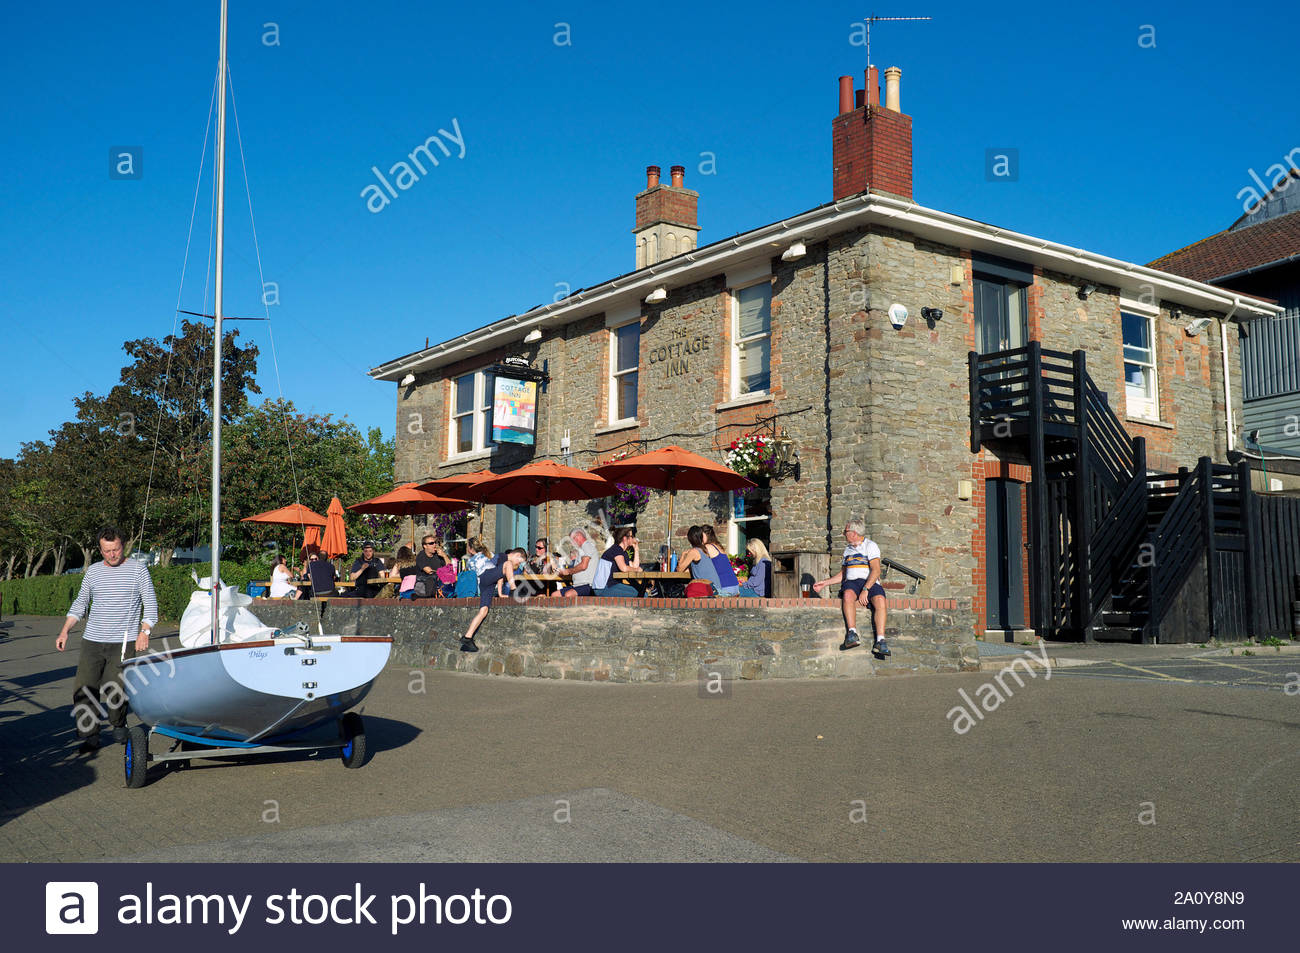 The Cottage Inn A Harbourside Pub At Baltic Wharf By Bristol S